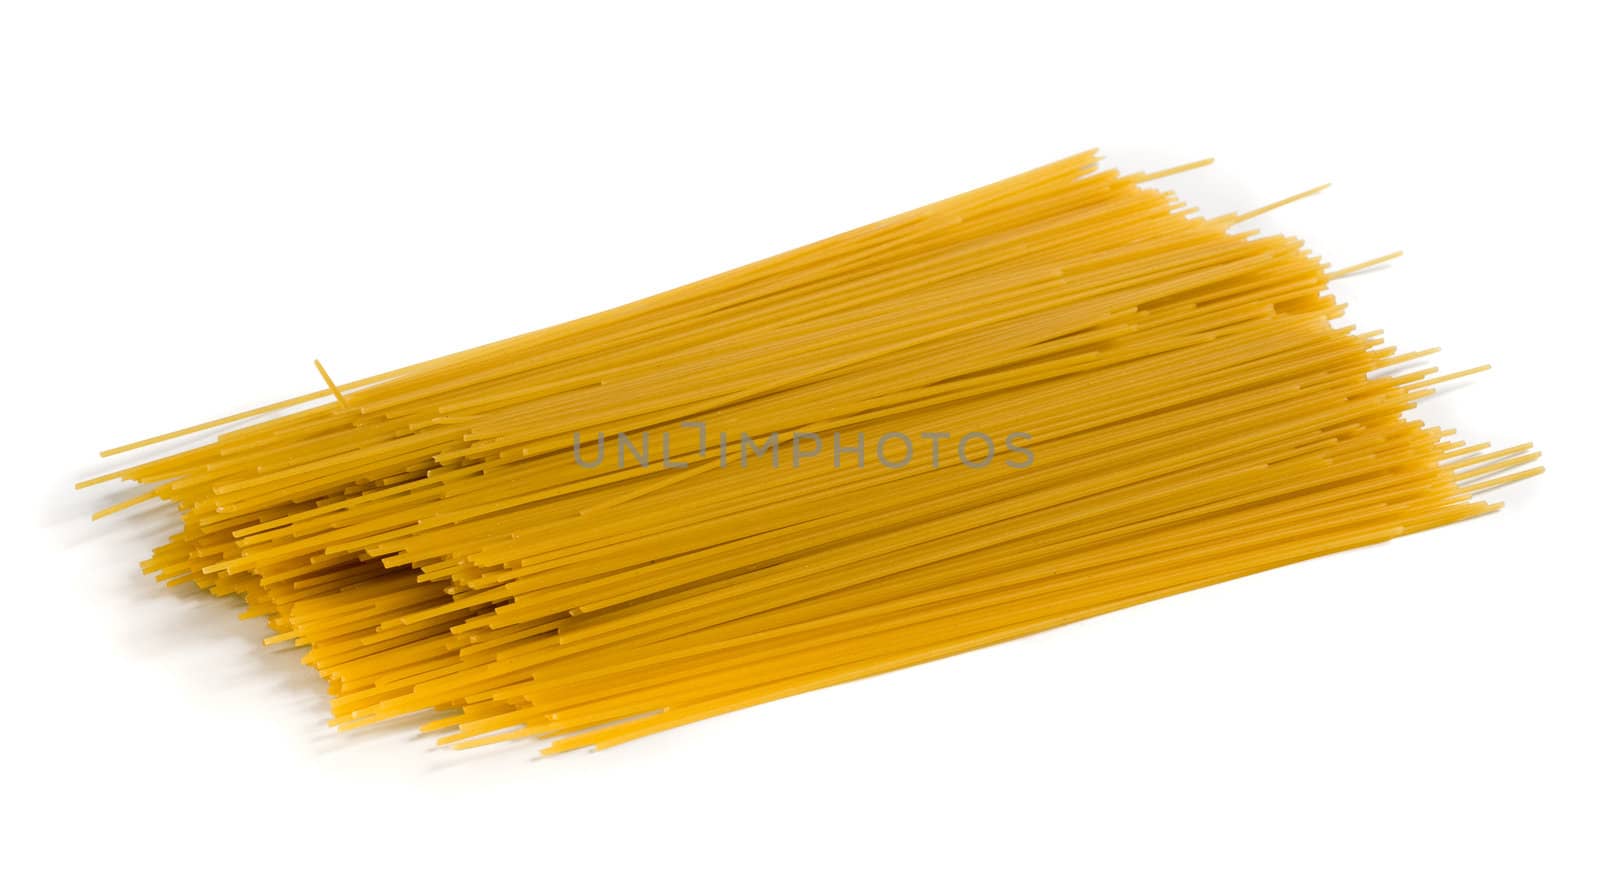 Yellow spaghetti with shadow on white background by ints